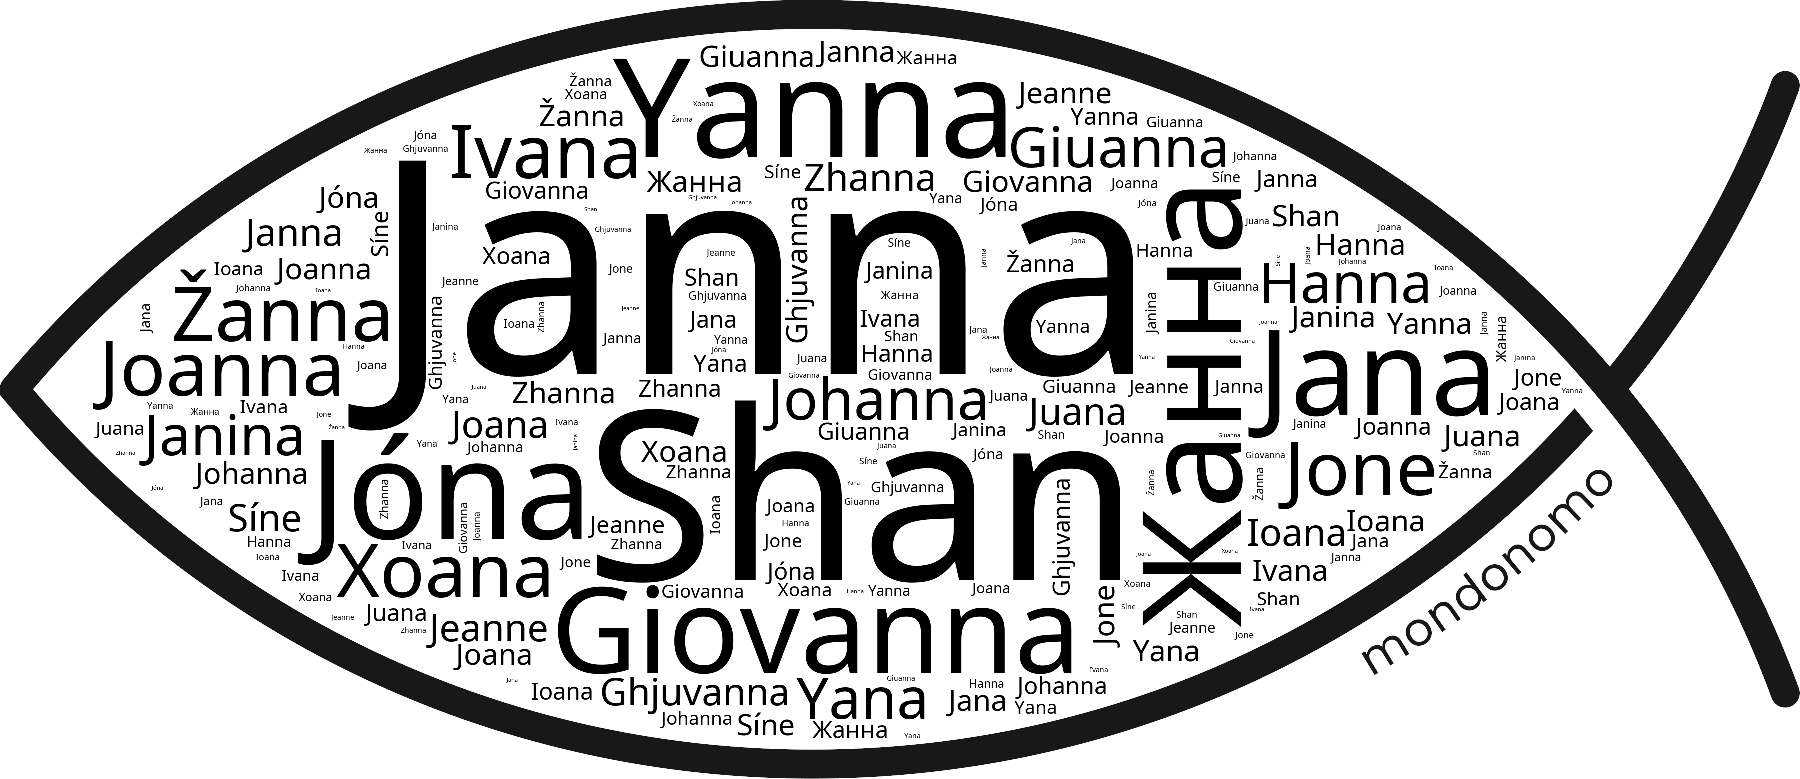 Name Janna in the world's Bibles